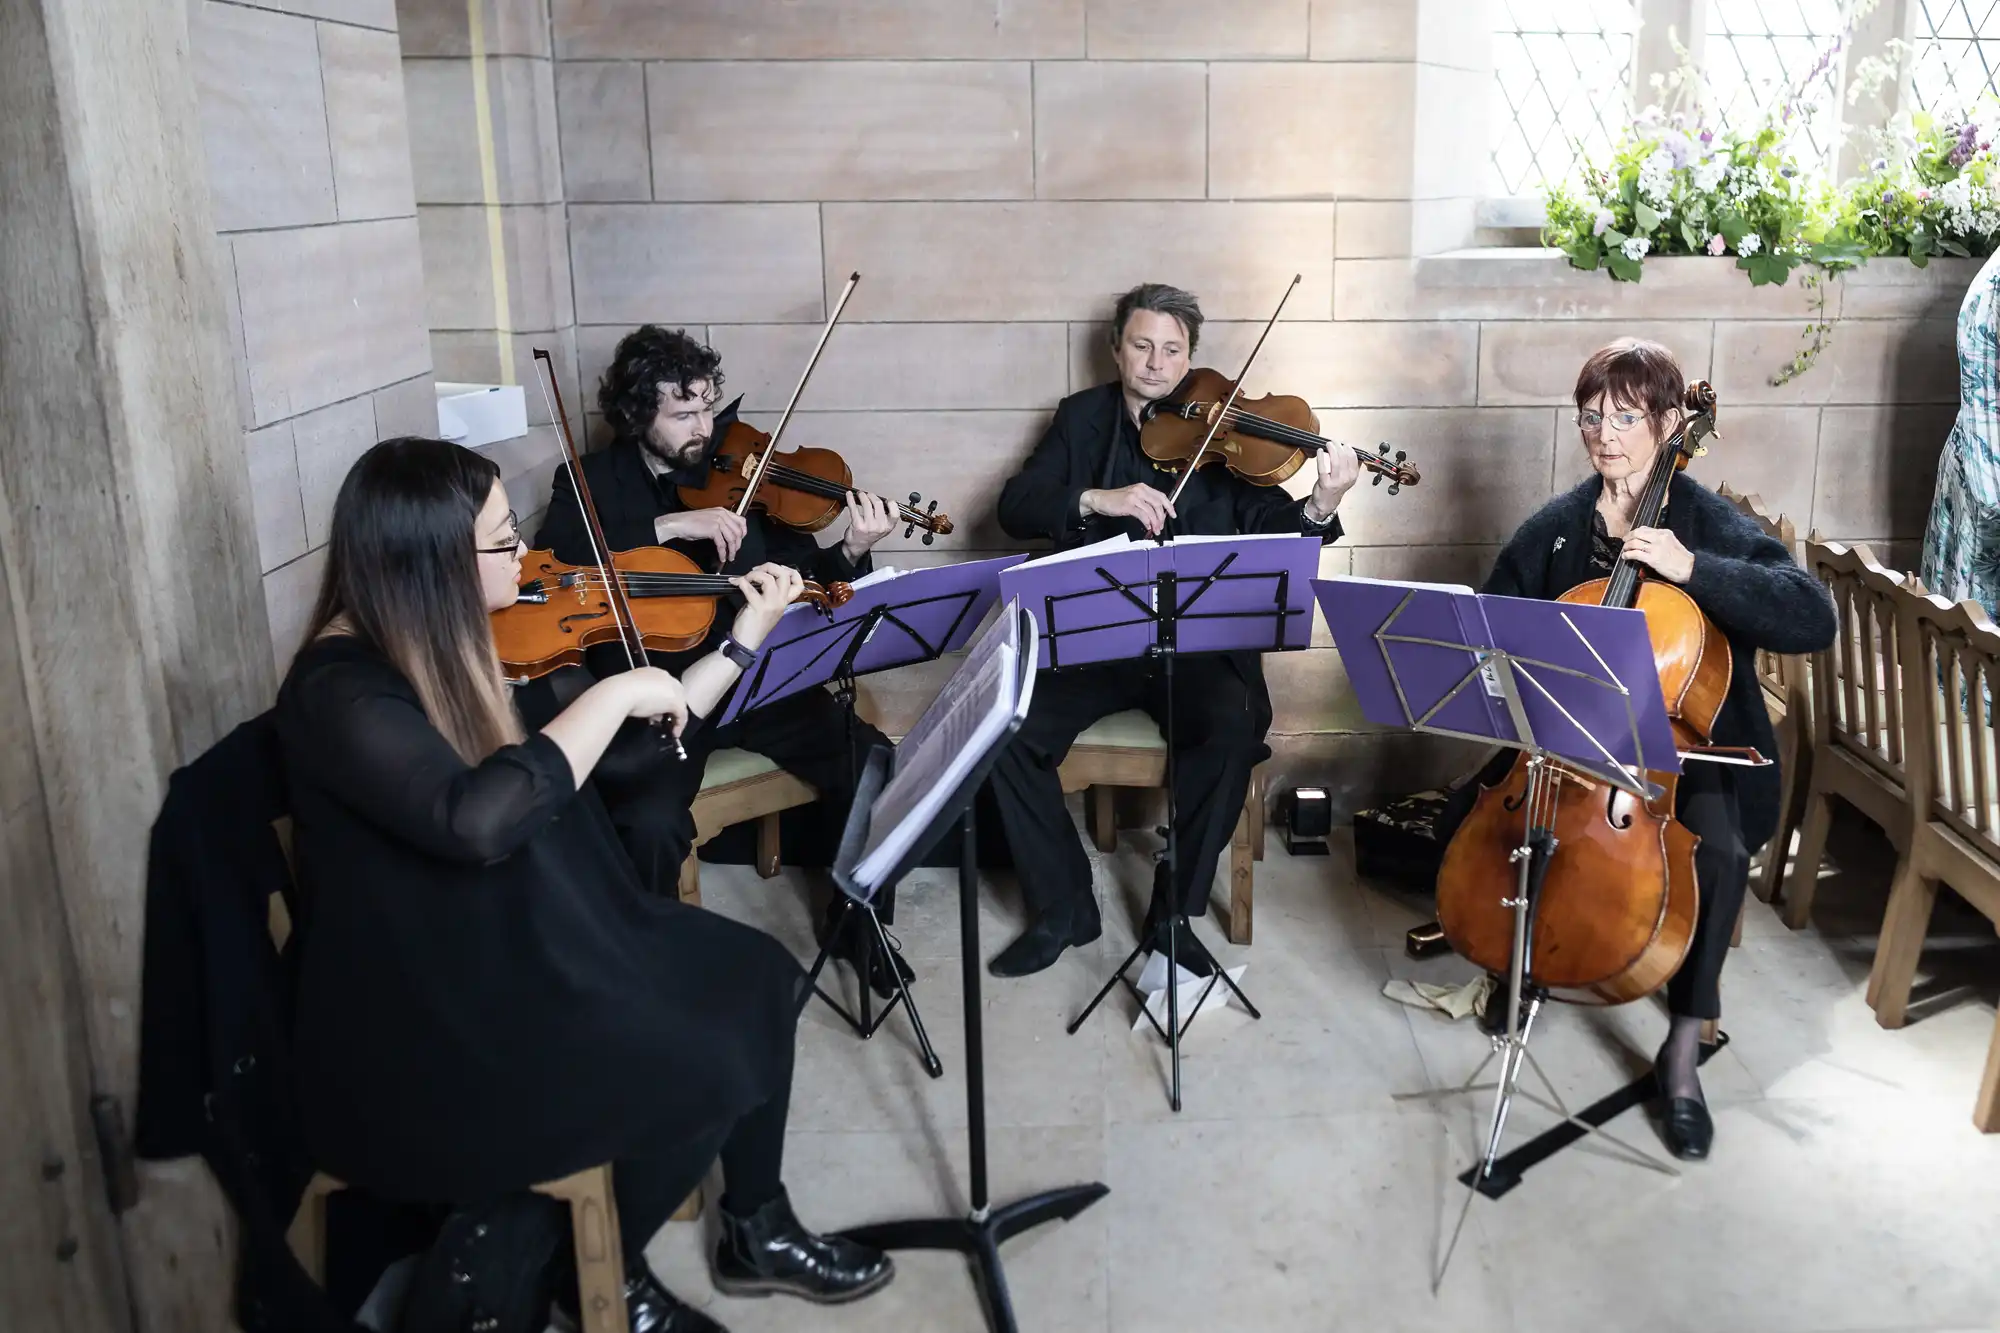 A string quartet with two violinists, a violist, and a cellist performing indoors, using sheet music on stands.